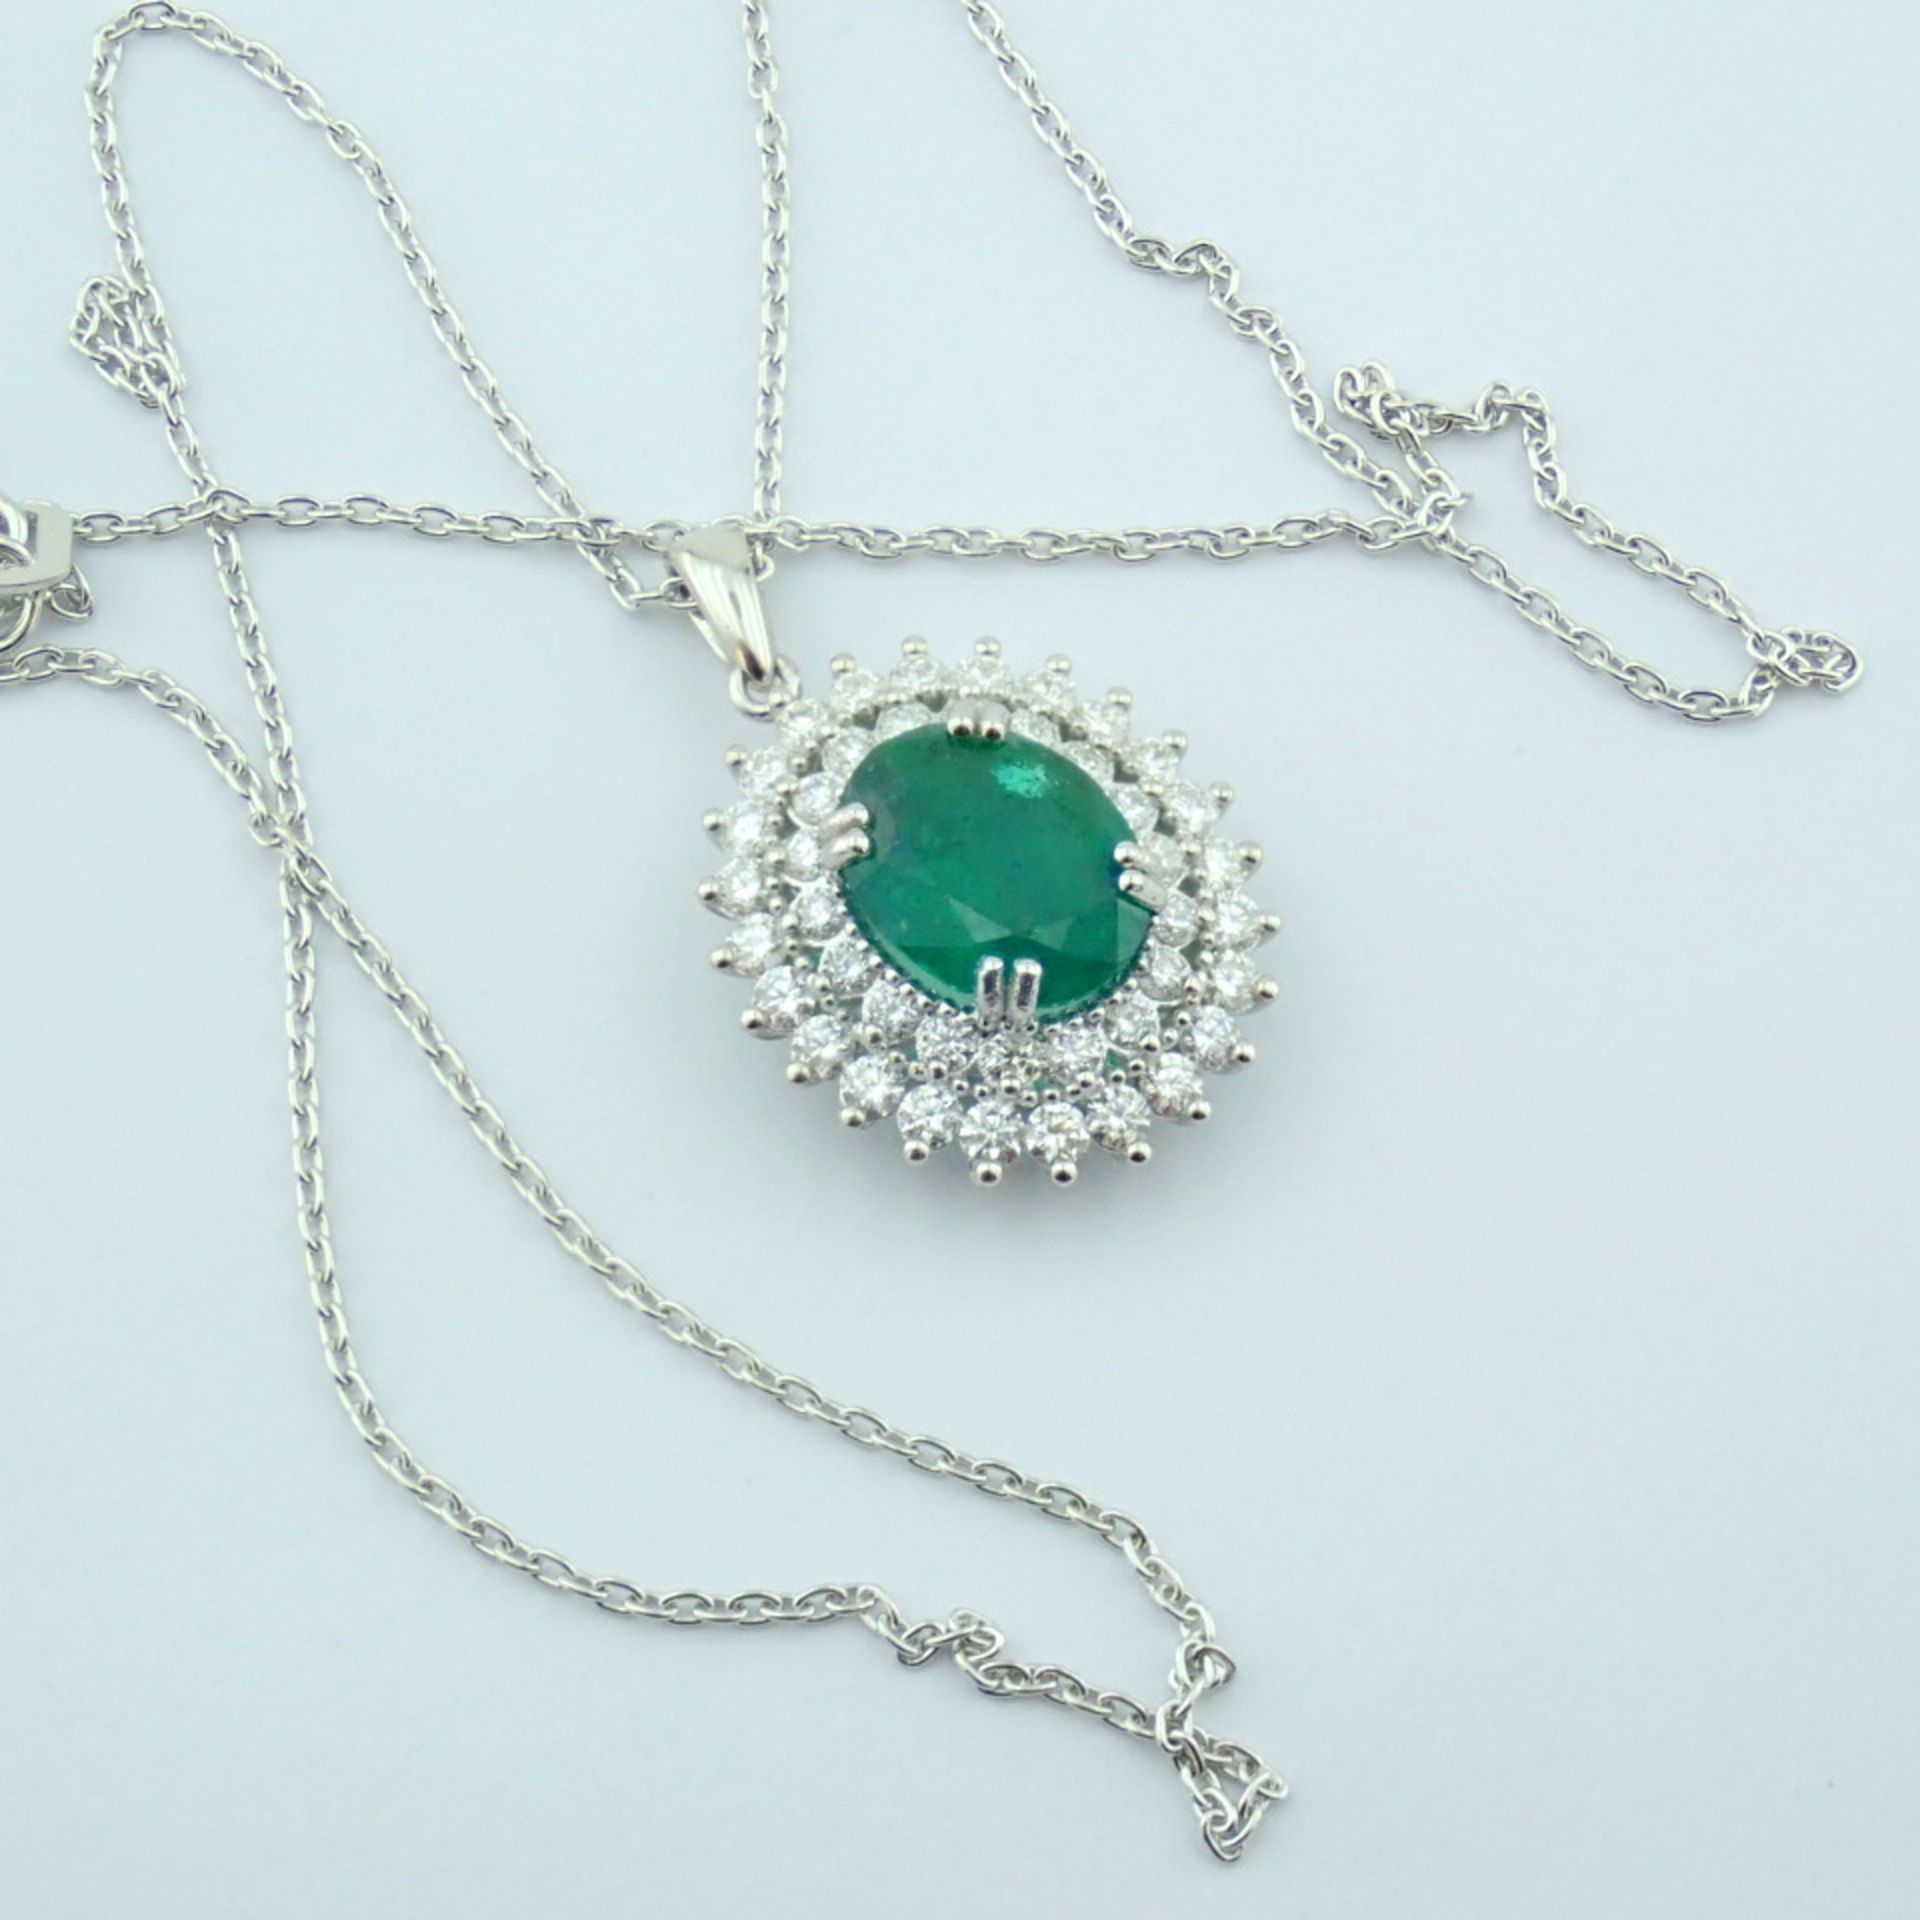 Certificated 14K White Gold Diamond & Emerald Necklace - Image 3 of 11